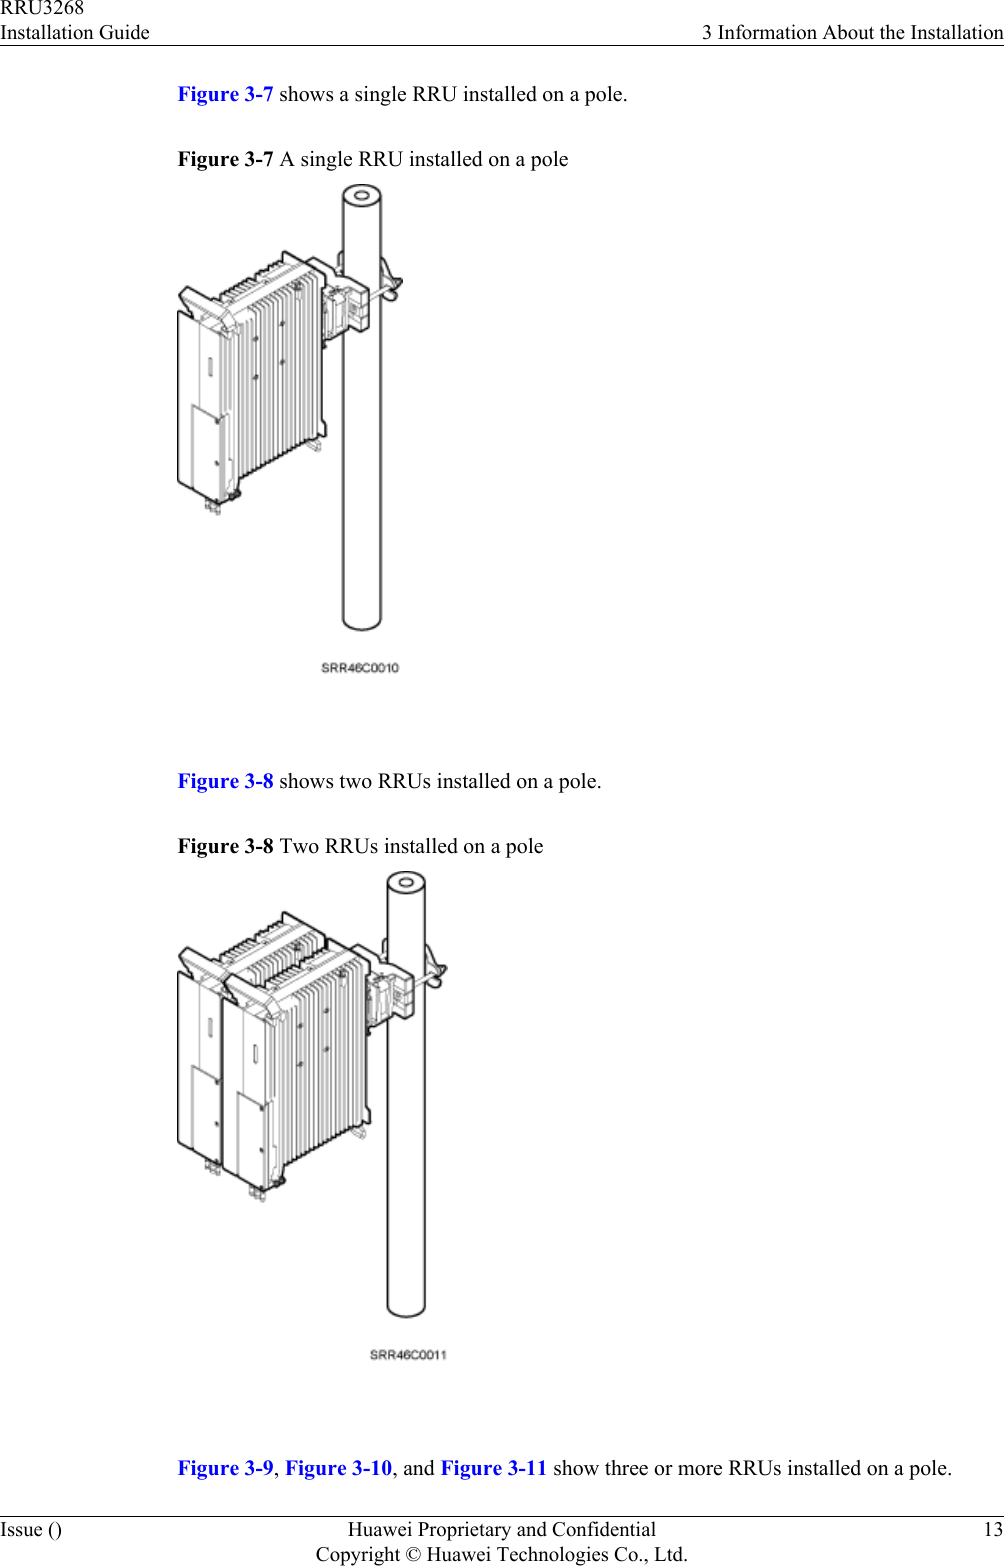 Figure 3-7 shows a single RRU installed on a pole.Figure 3-7 A single RRU installed on a pole Figure 3-8 shows two RRUs installed on a pole.Figure 3-8 Two RRUs installed on a pole Figure 3-9, Figure 3-10, and Figure 3-11 show three or more RRUs installed on a pole.RRU3268Installation Guide 3 Information About the InstallationIssue () Huawei Proprietary and ConfidentialCopyright © Huawei Technologies Co., Ltd.13